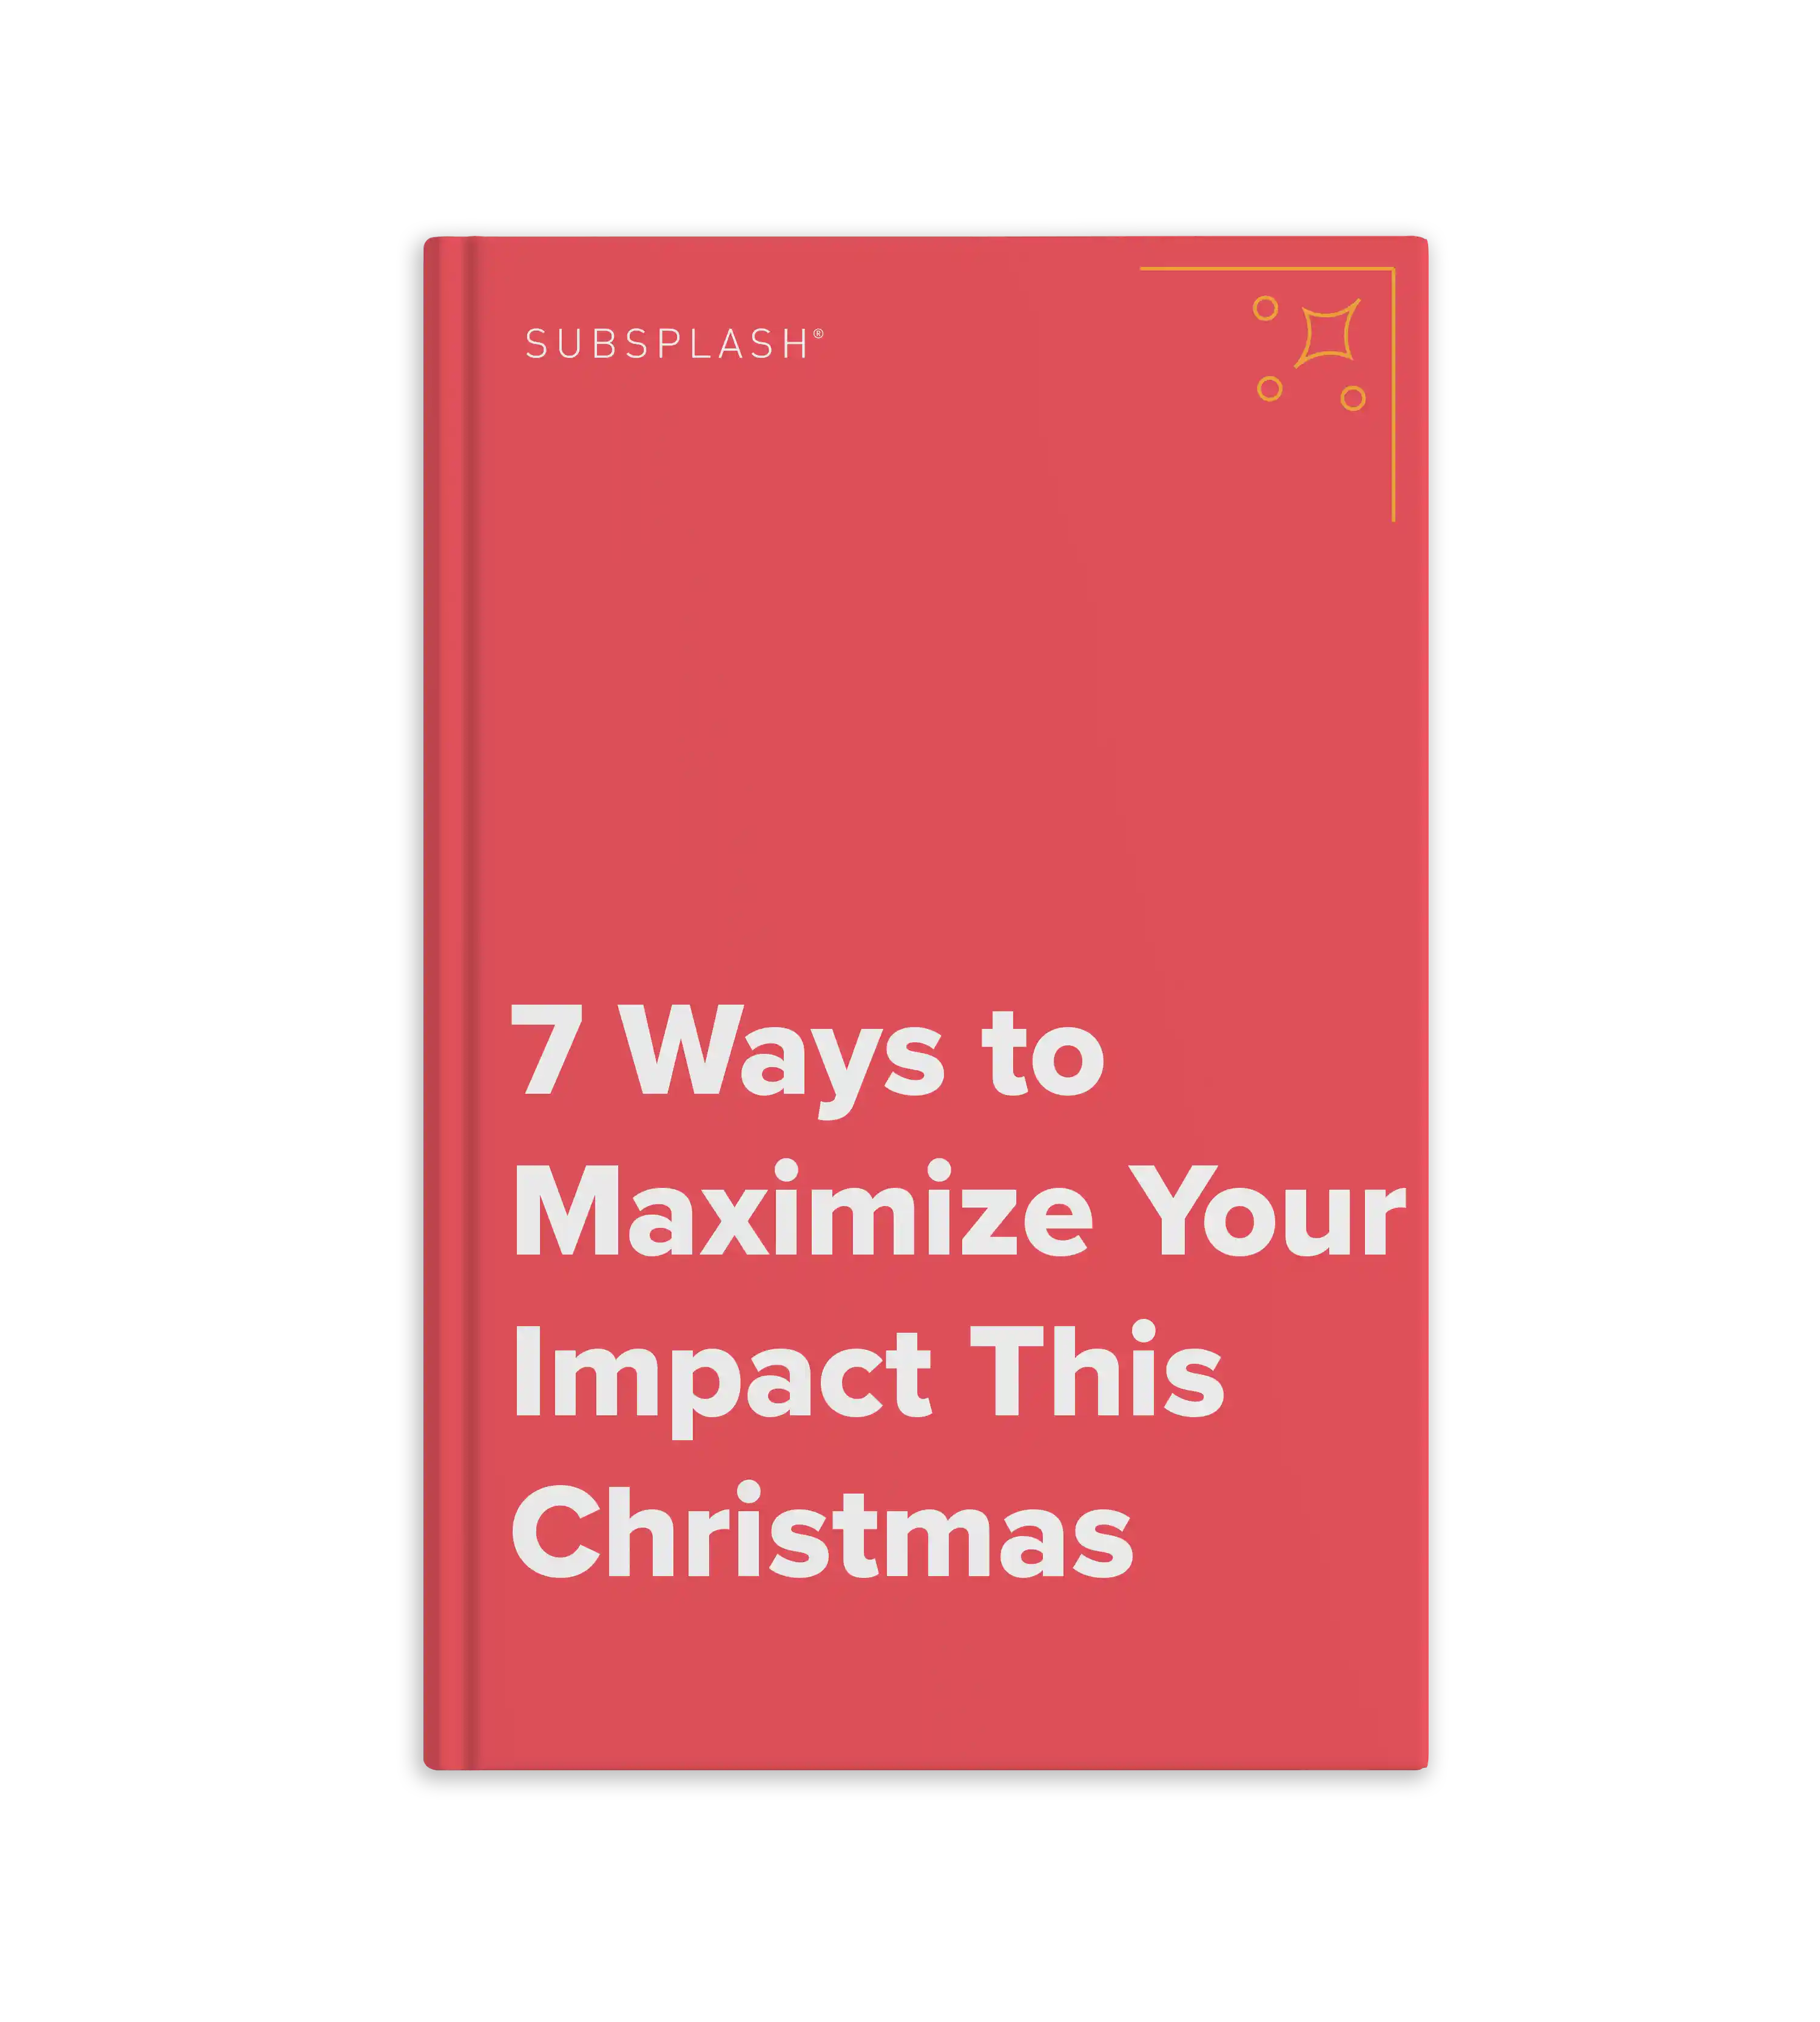 7 Ways to Maximize Your Impact This Christmas